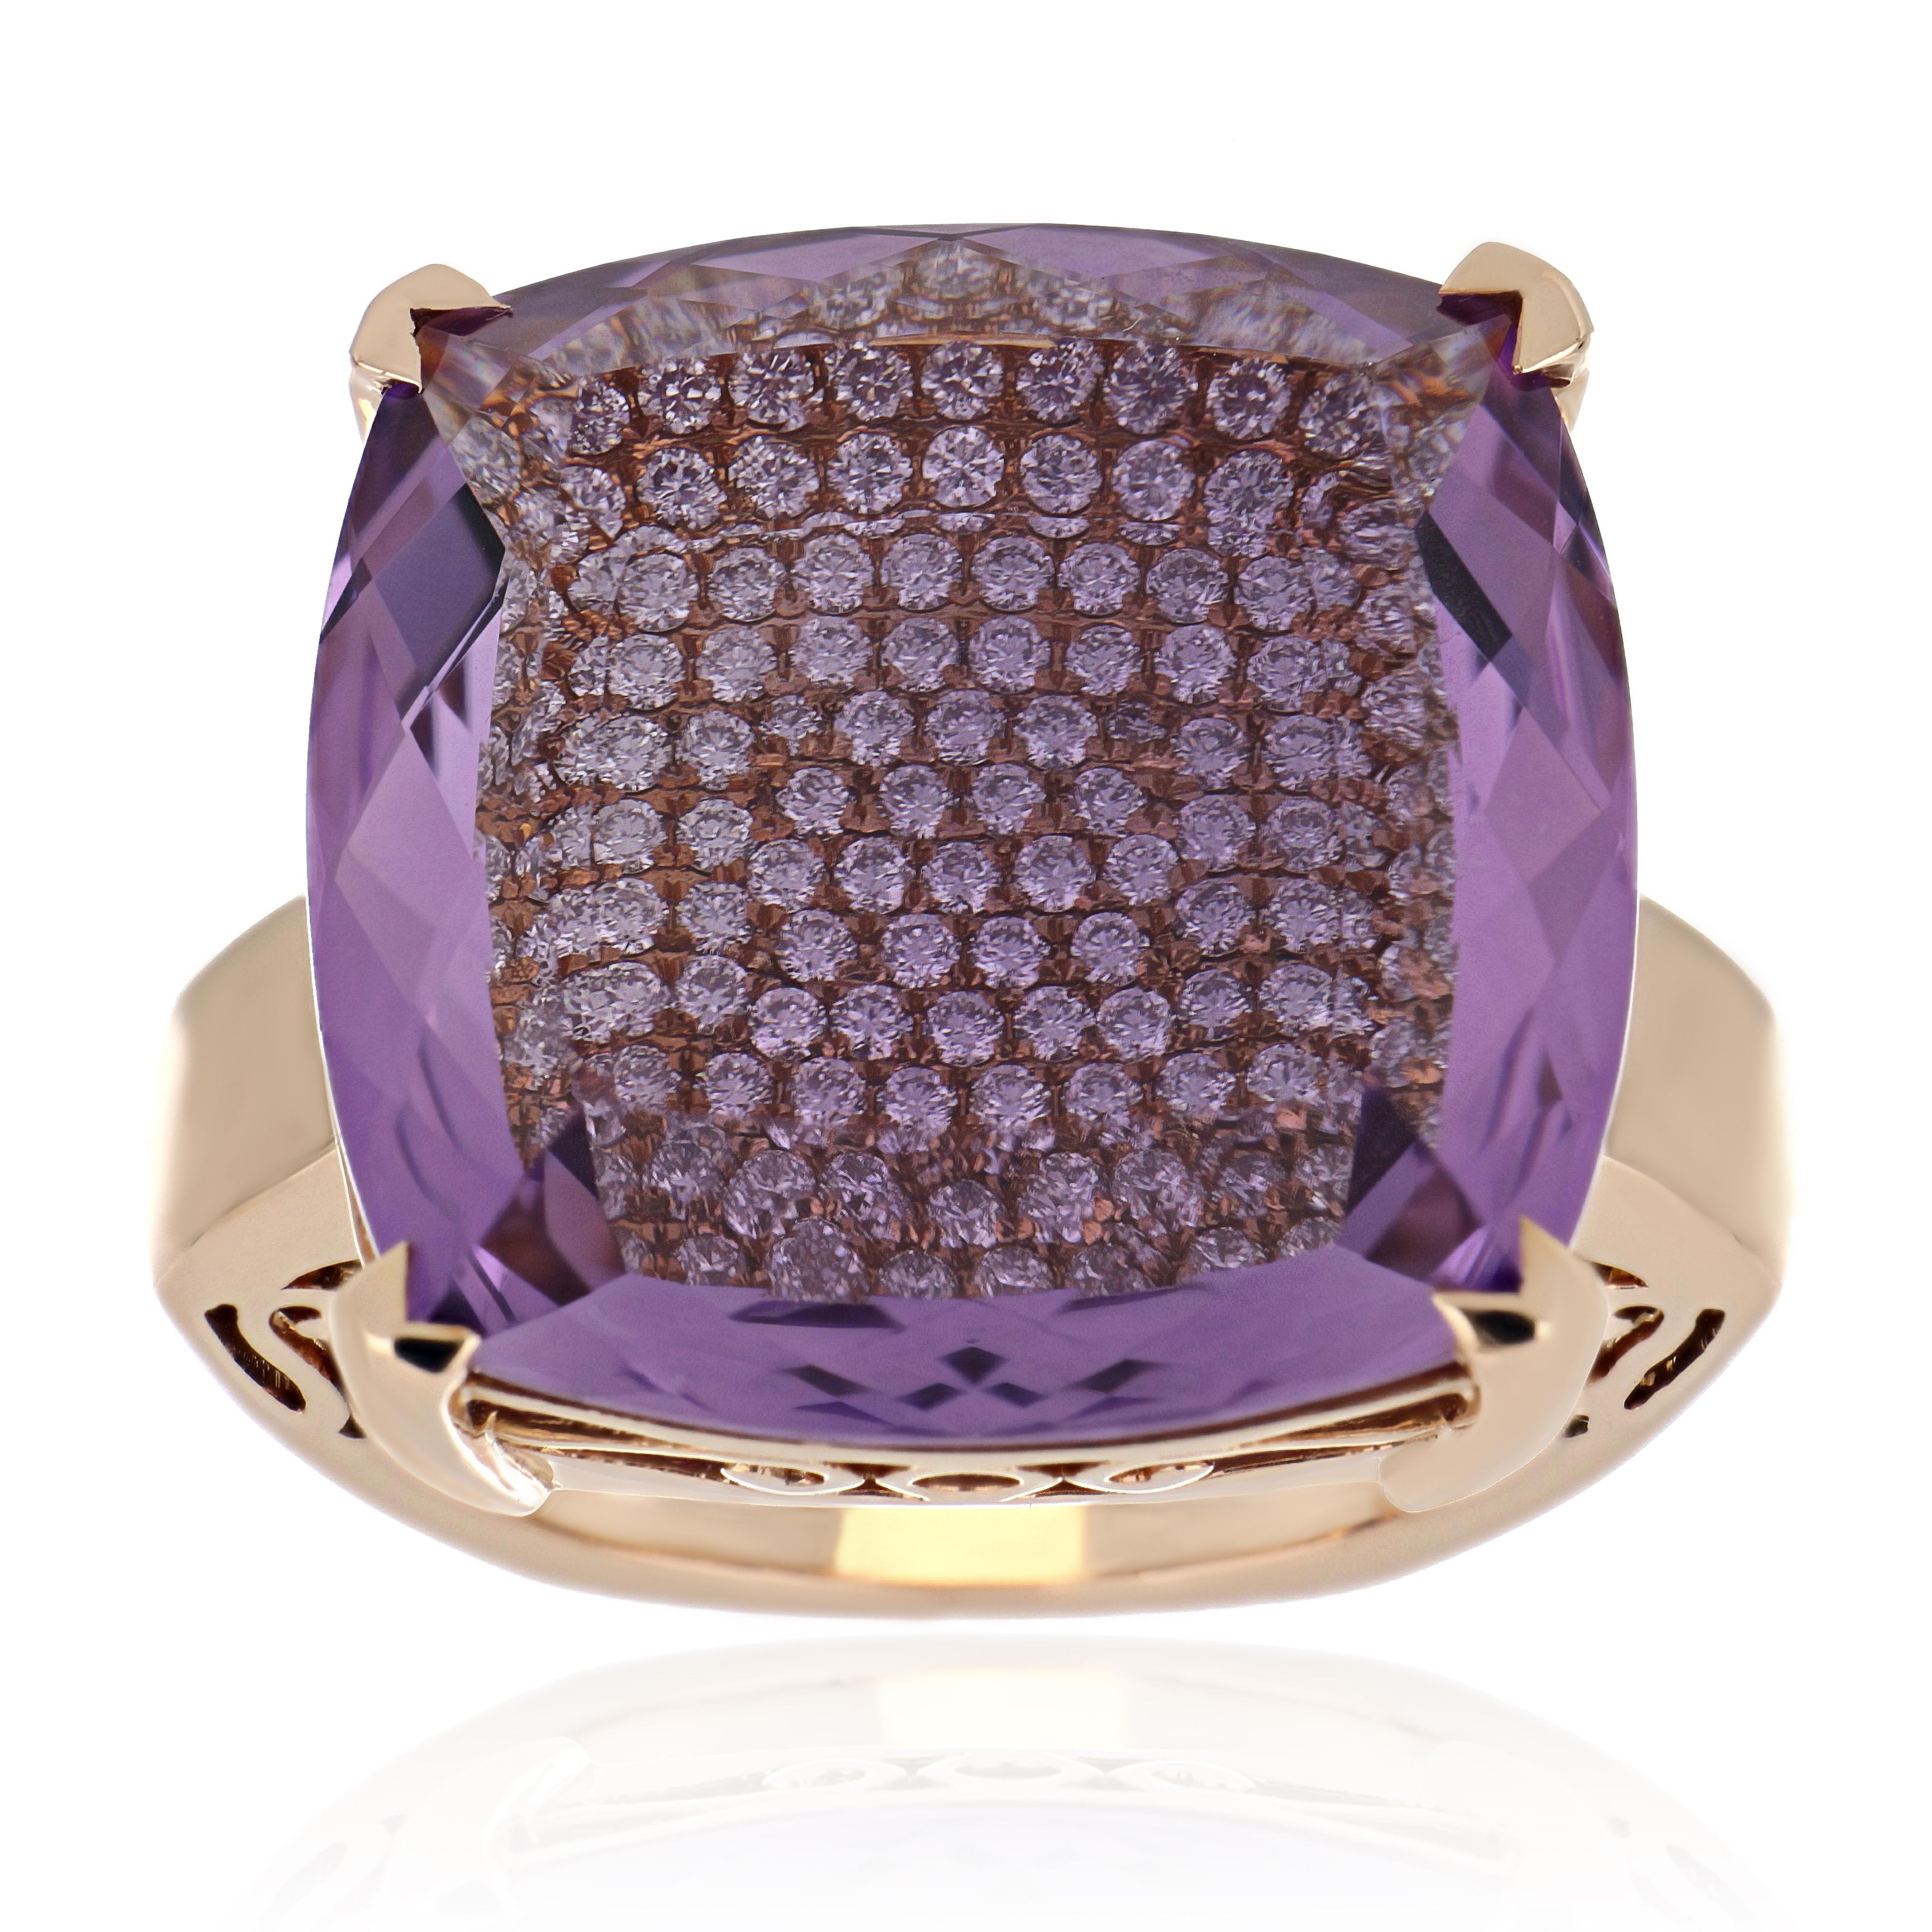 14 Karat Rose Gold ring studded with Cushion Cut  20.67 Ct  Amethyst,  with unique under stone setting of  1.06 Cts Diamond Beautifully hand crafted in 14 Karat Rose Gold.

Stone Details:
Amethyst: 20 x 20 mm

Stone Weights:
Amethyst: 20.67